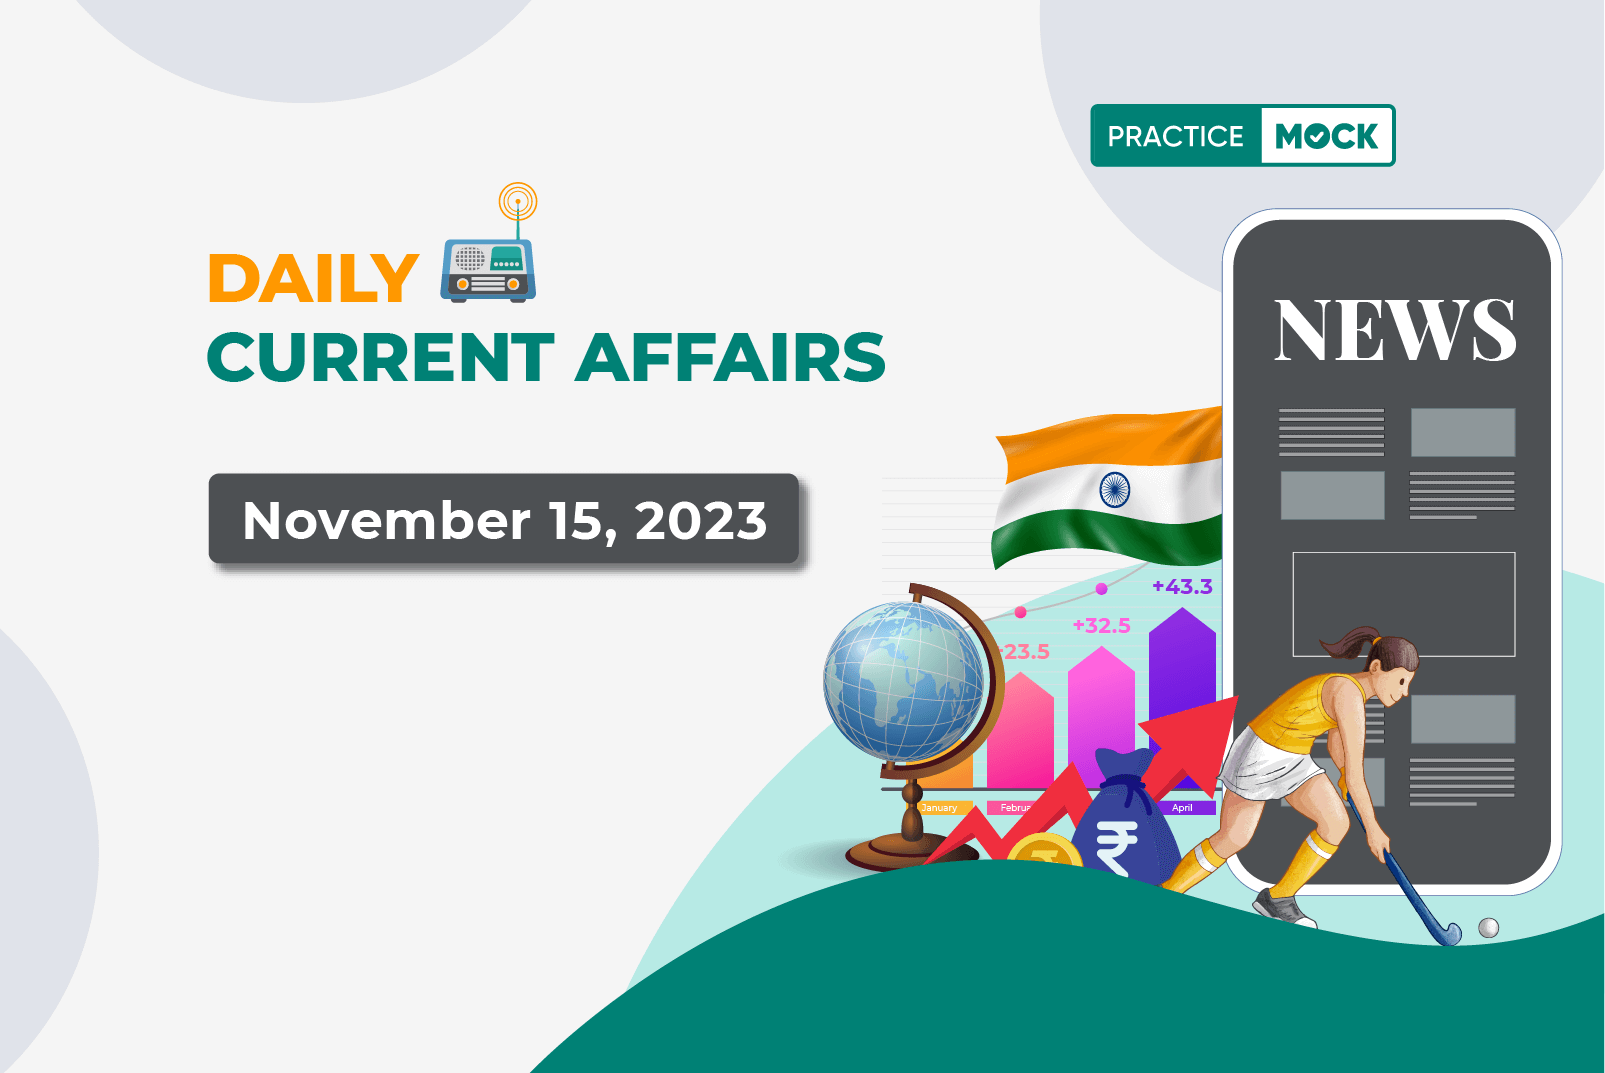 Daily Current Affairs- November 15, 2023